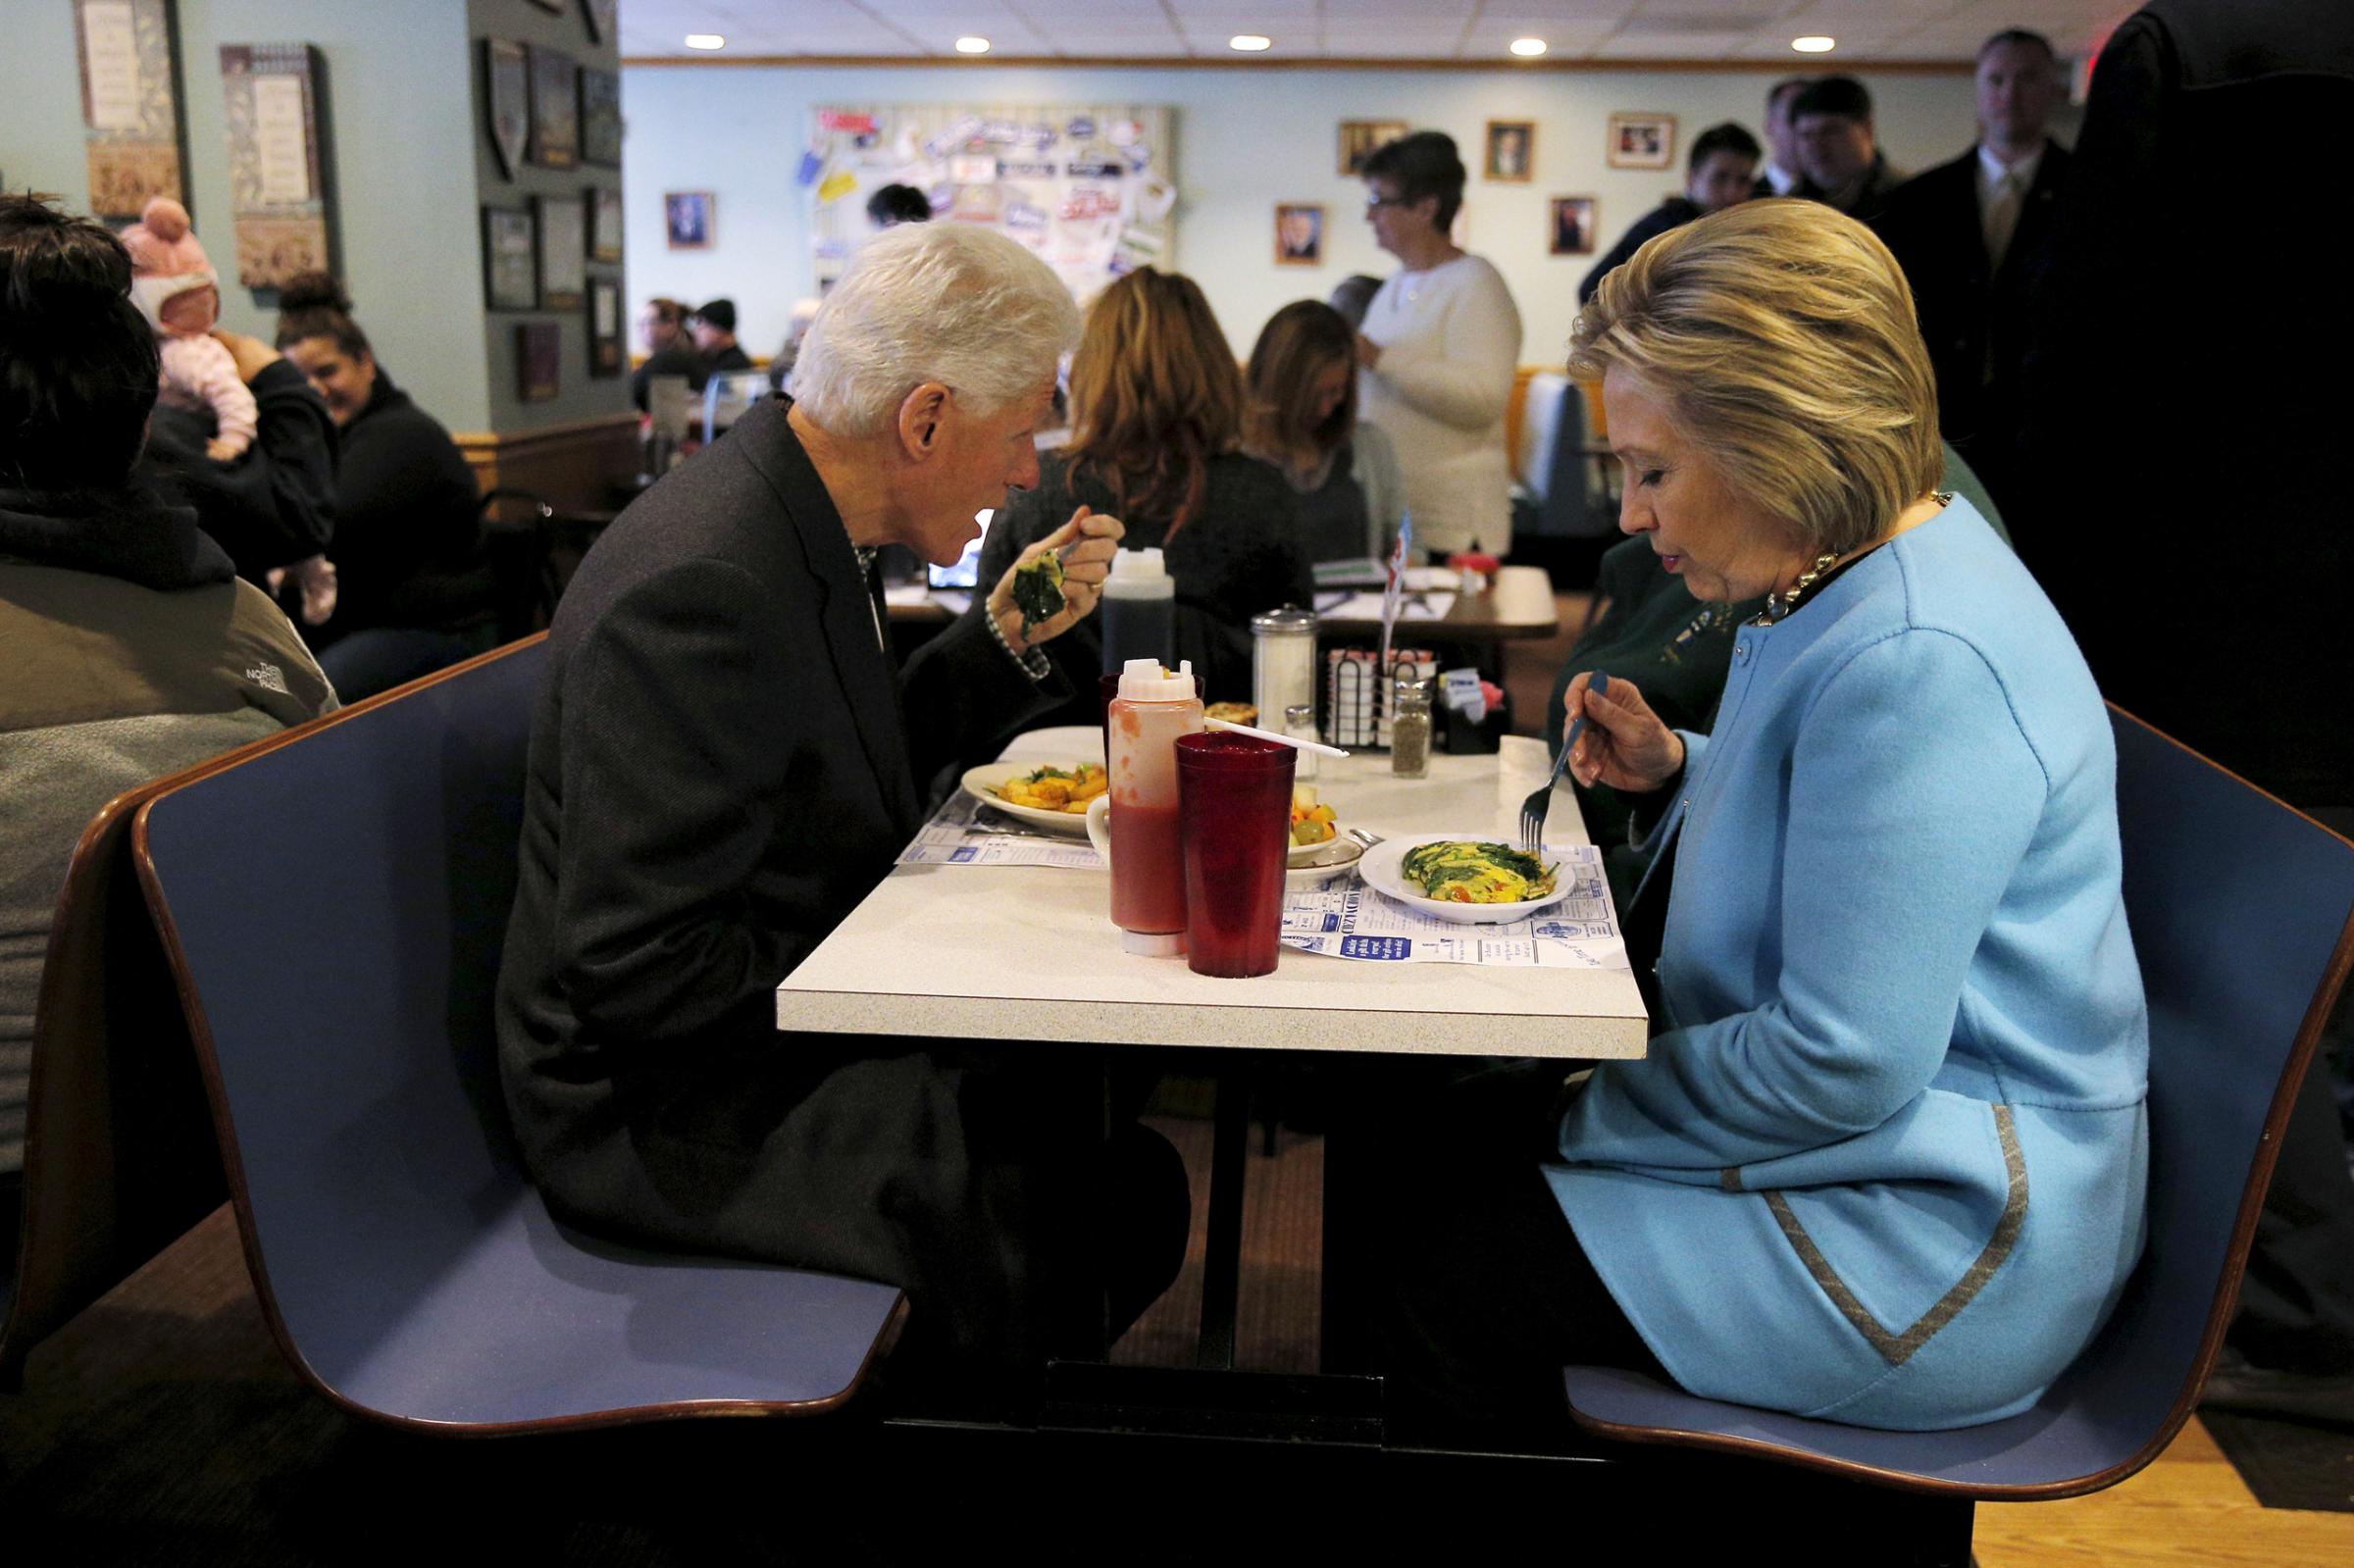 U.S. Democratic presidential candidate Hillary Clinton and her husband, former U.S. President Bill Clinton eat breakfast at the Chez Vachon restaurant in Manchester